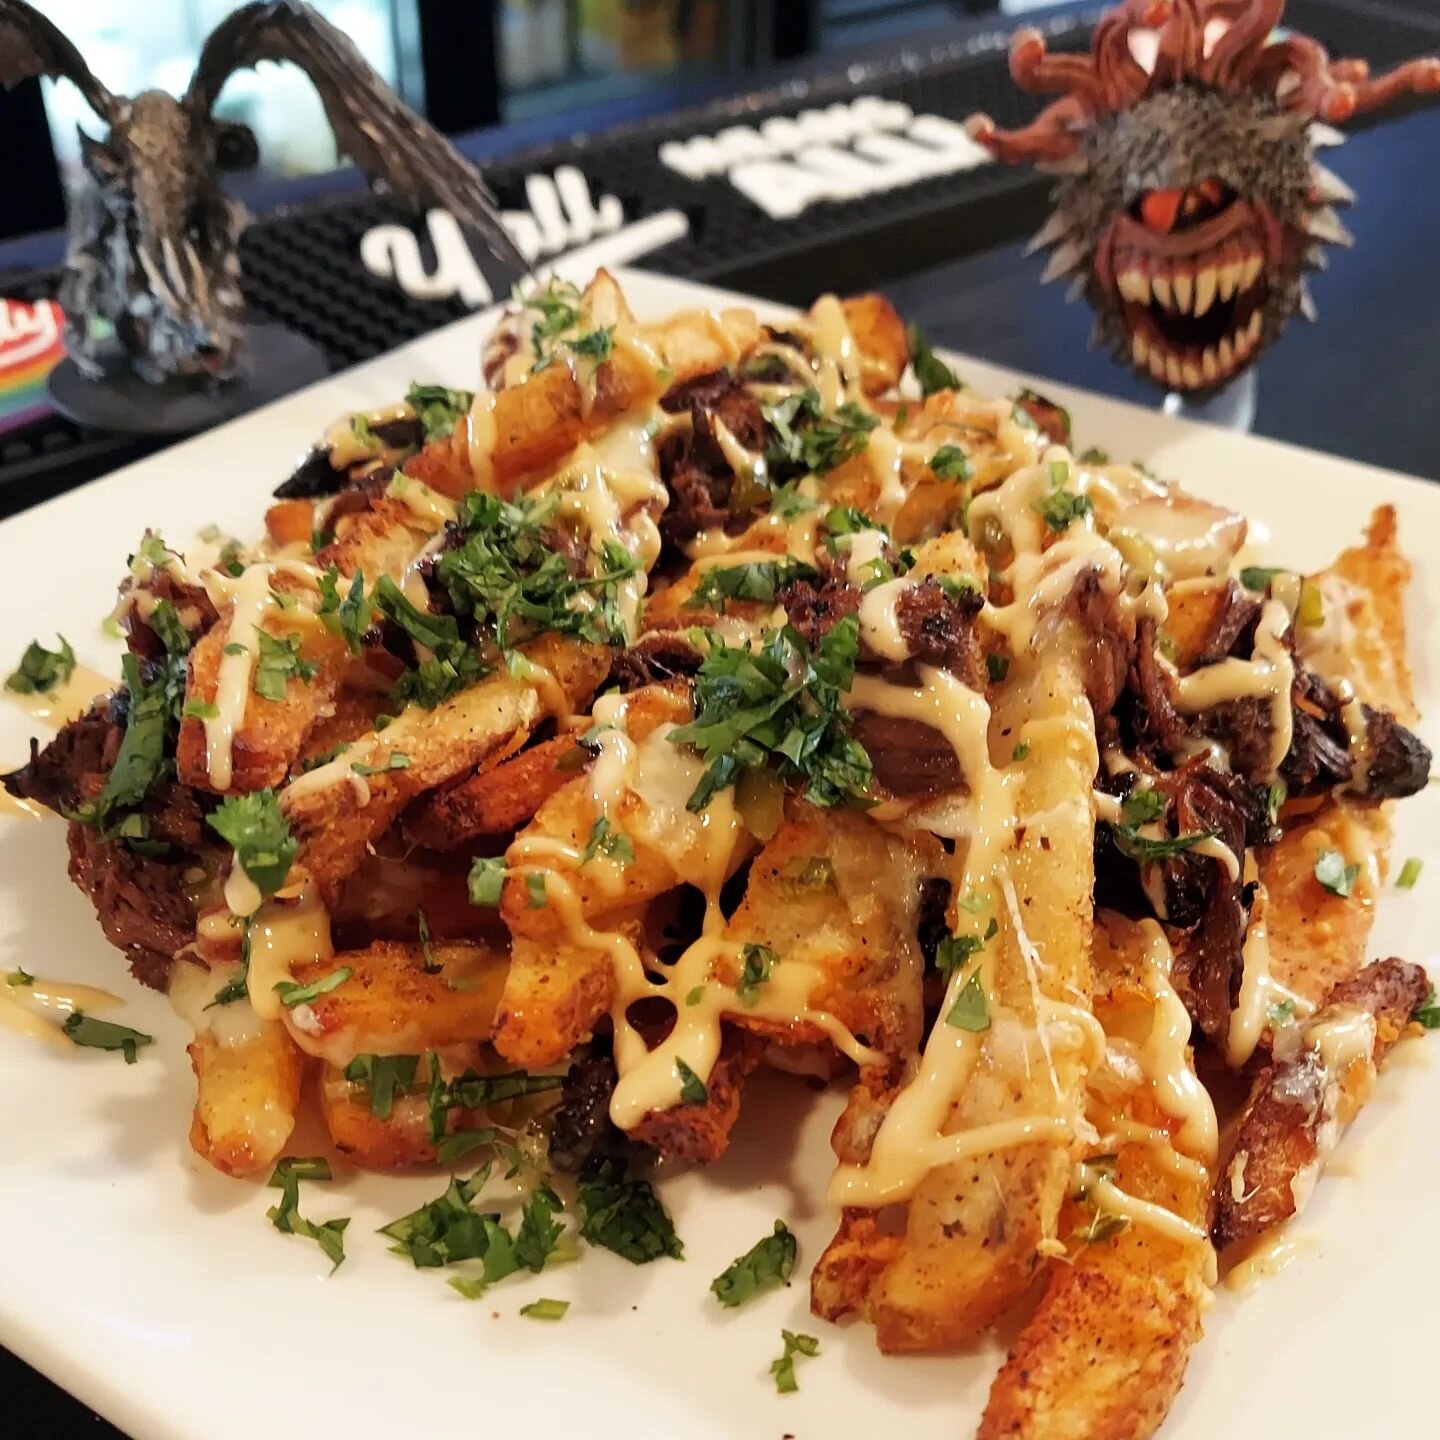 We have a special running tonight through Sunday, the Charmander Snack! Our house fries loaded with beef, cheese, pickled jalape&ntilde;os, and topped with honey Sriracha aoli and cilantro.

Om nom nom

#ithaca #ithacany #food #specials #gamebar #gam